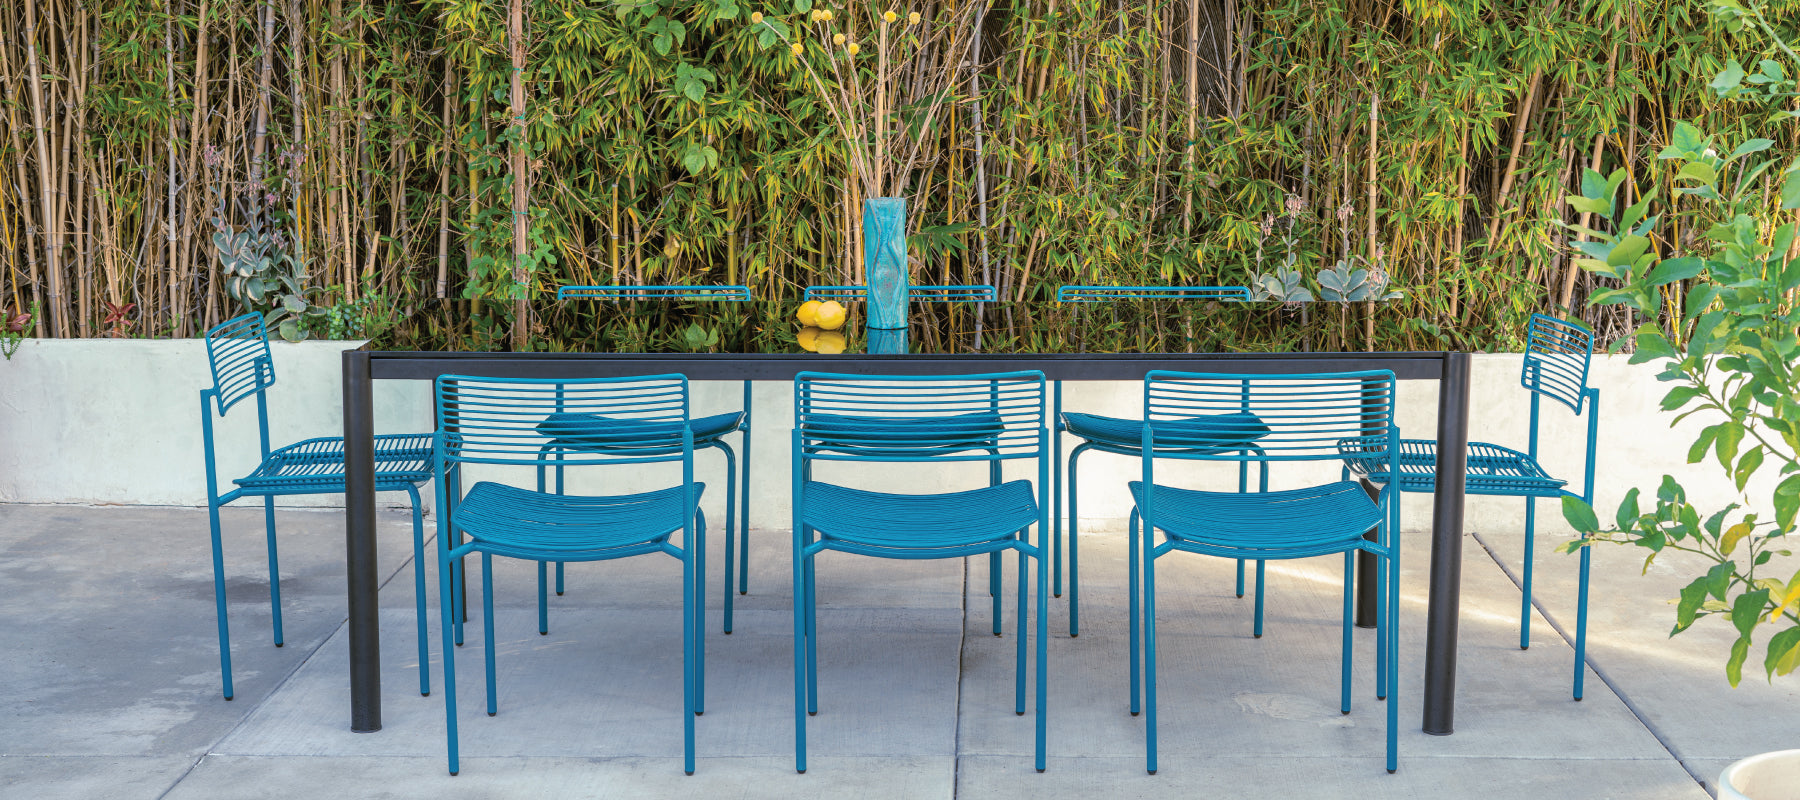 Get Ready For Summer by Refreshing Your Outdoor Furniture